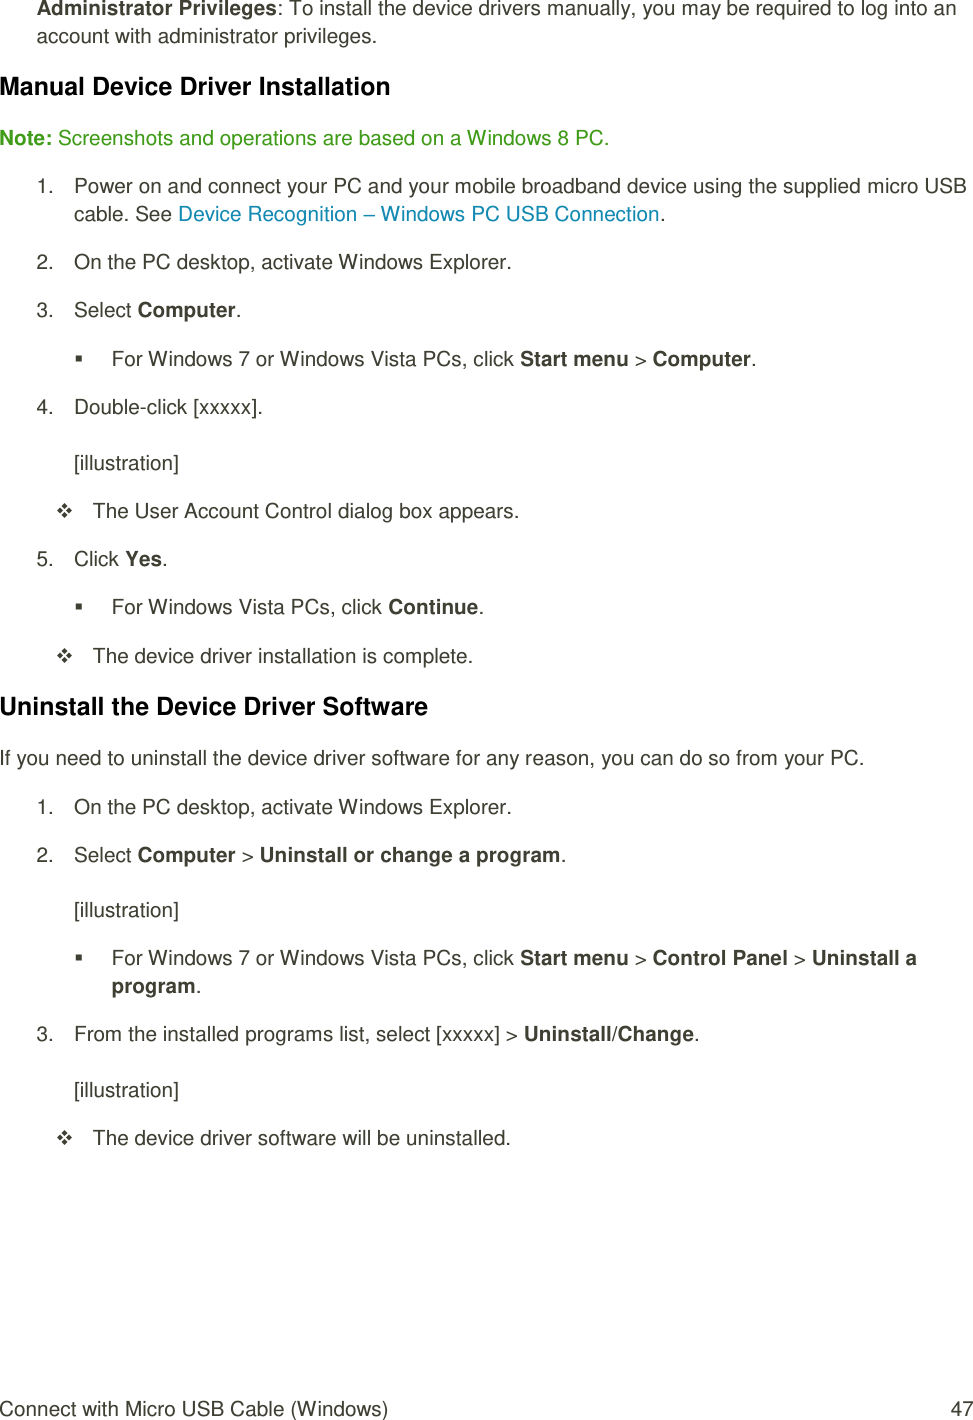 Connect with Micro USB Cable (Windows)  47 Administrator Privileges: To install the device drivers manually, you may be required to log into an account with administrator privileges. Manual Device Driver Installation Note: Screenshots and operations are based on a Windows 8 PC. 1.  Power on and connect your PC and your mobile broadband device using the supplied micro USB cable. See Device Recognition – Windows PC USB Connection. 2.  On the PC desktop, activate Windows Explorer. 3.  Select Computer.   For Windows 7 or Windows Vista PCs, click Start menu &gt; Computer. 4.  Double-click [xxxxx].  [illustration]   The User Account Control dialog box appears. 5.  Click Yes.   For Windows Vista PCs, click Continue.   The device driver installation is complete. Uninstall the Device Driver Software If you need to uninstall the device driver software for any reason, you can do so from your PC. 1.  On the PC desktop, activate Windows Explorer. 2.  Select Computer &gt; Uninstall or change a program.  [illustration]   For Windows 7 or Windows Vista PCs, click Start menu &gt; Control Panel &gt; Uninstall a program. 3.  From the installed programs list, select [xxxxx] &gt; Uninstall/Change.  [illustration]   The device driver software will be uninstalled.   